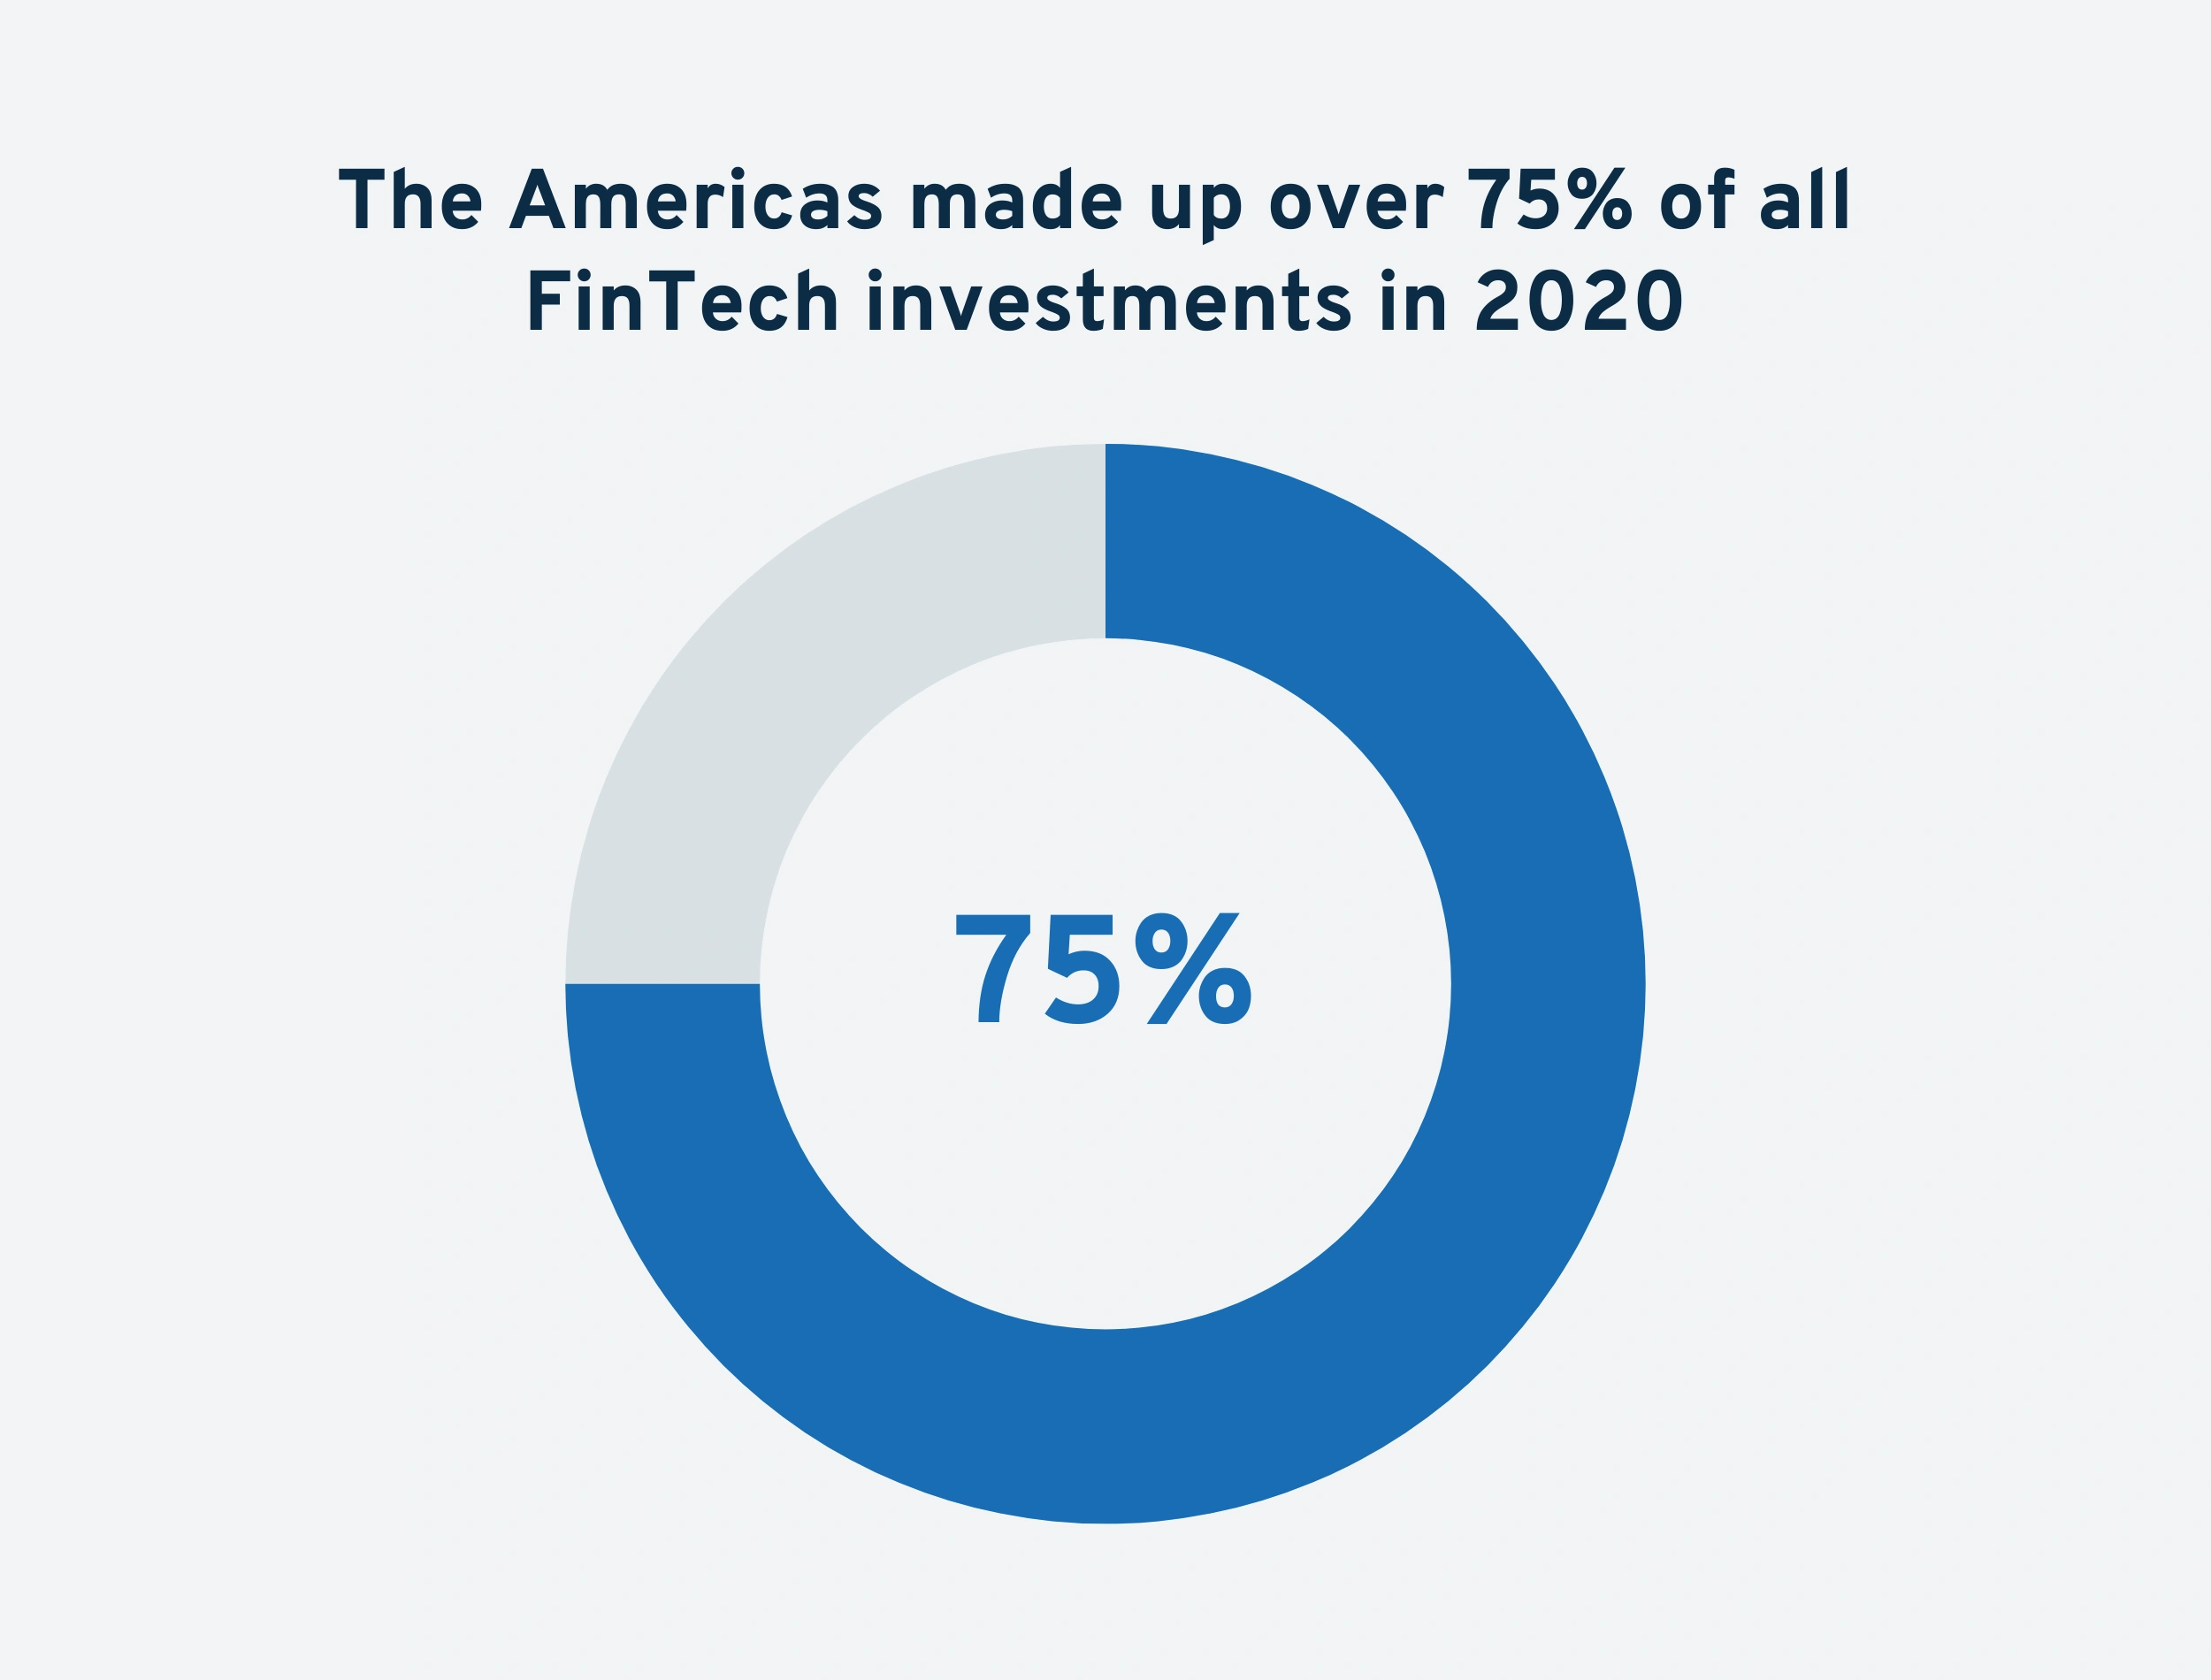 fintech-investments-2020-min.png